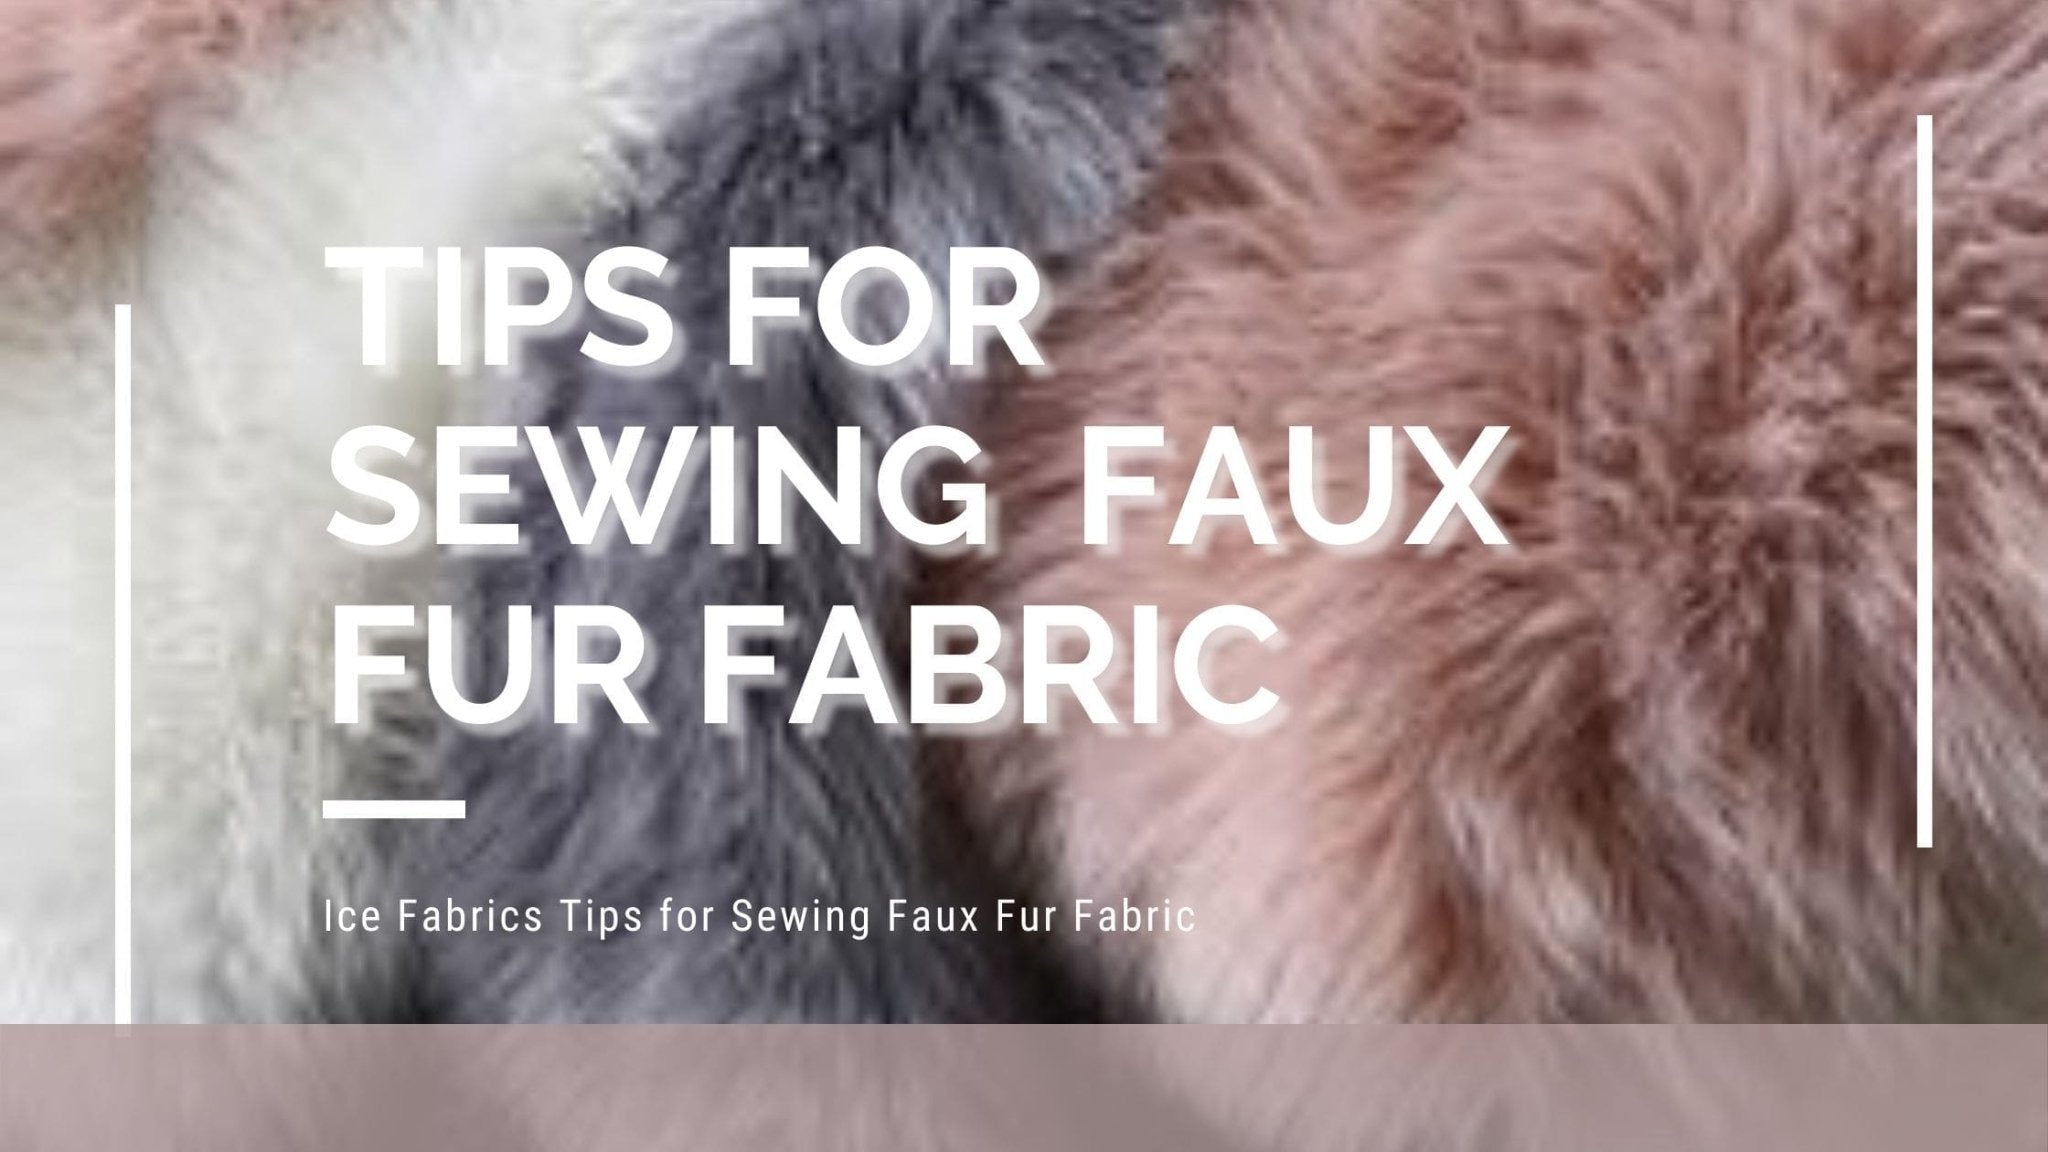 6 Best Sewing Projects and Uses for Faux Fur Fabric - ICE FABRICS